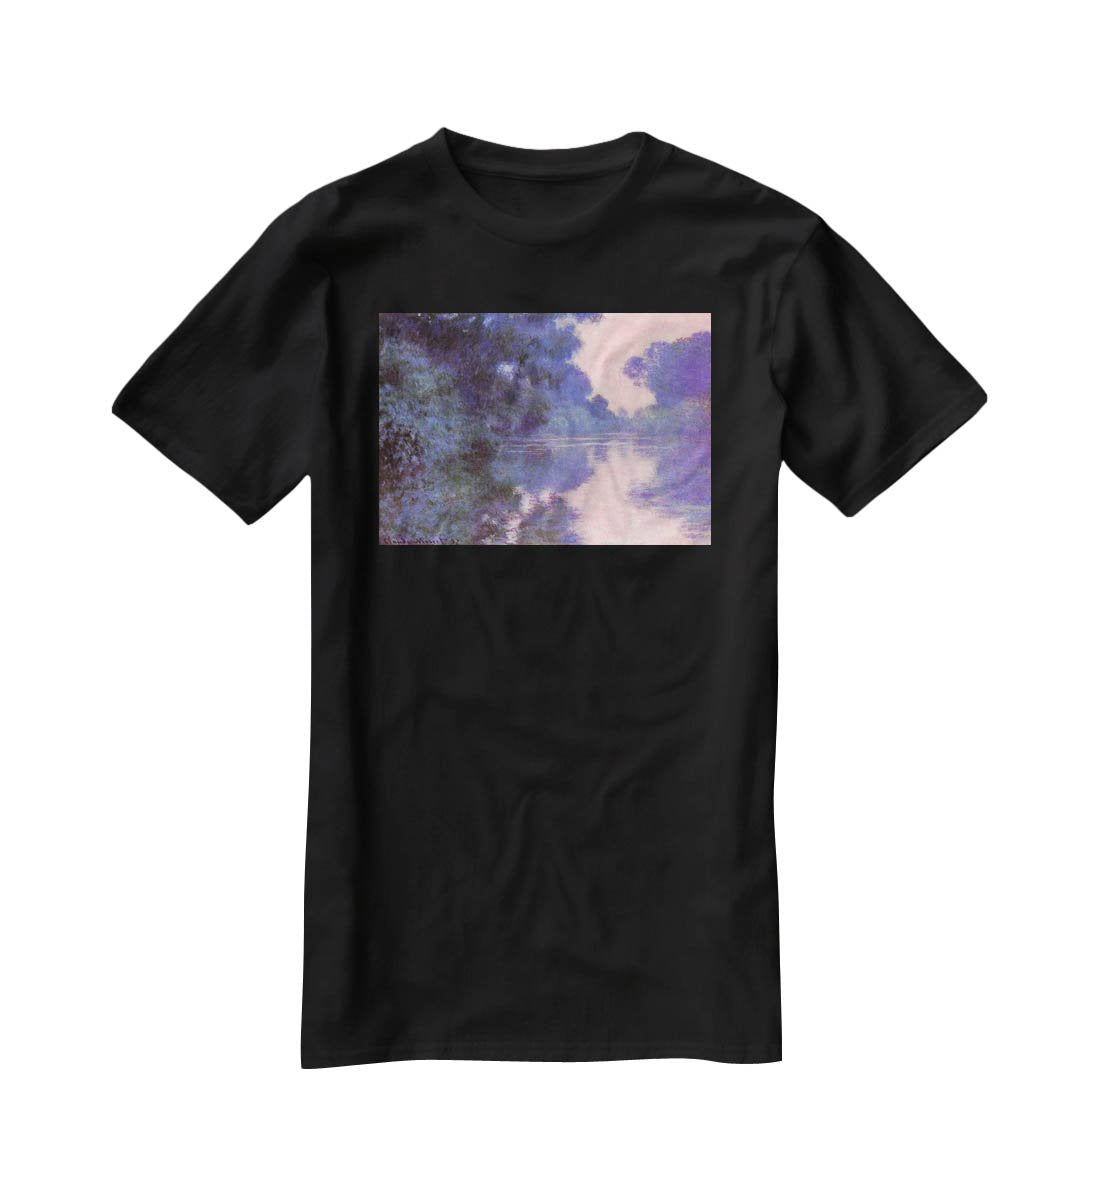 Seine arm at Giverny by Monet T-Shirt - Canvas Art Rocks - 1